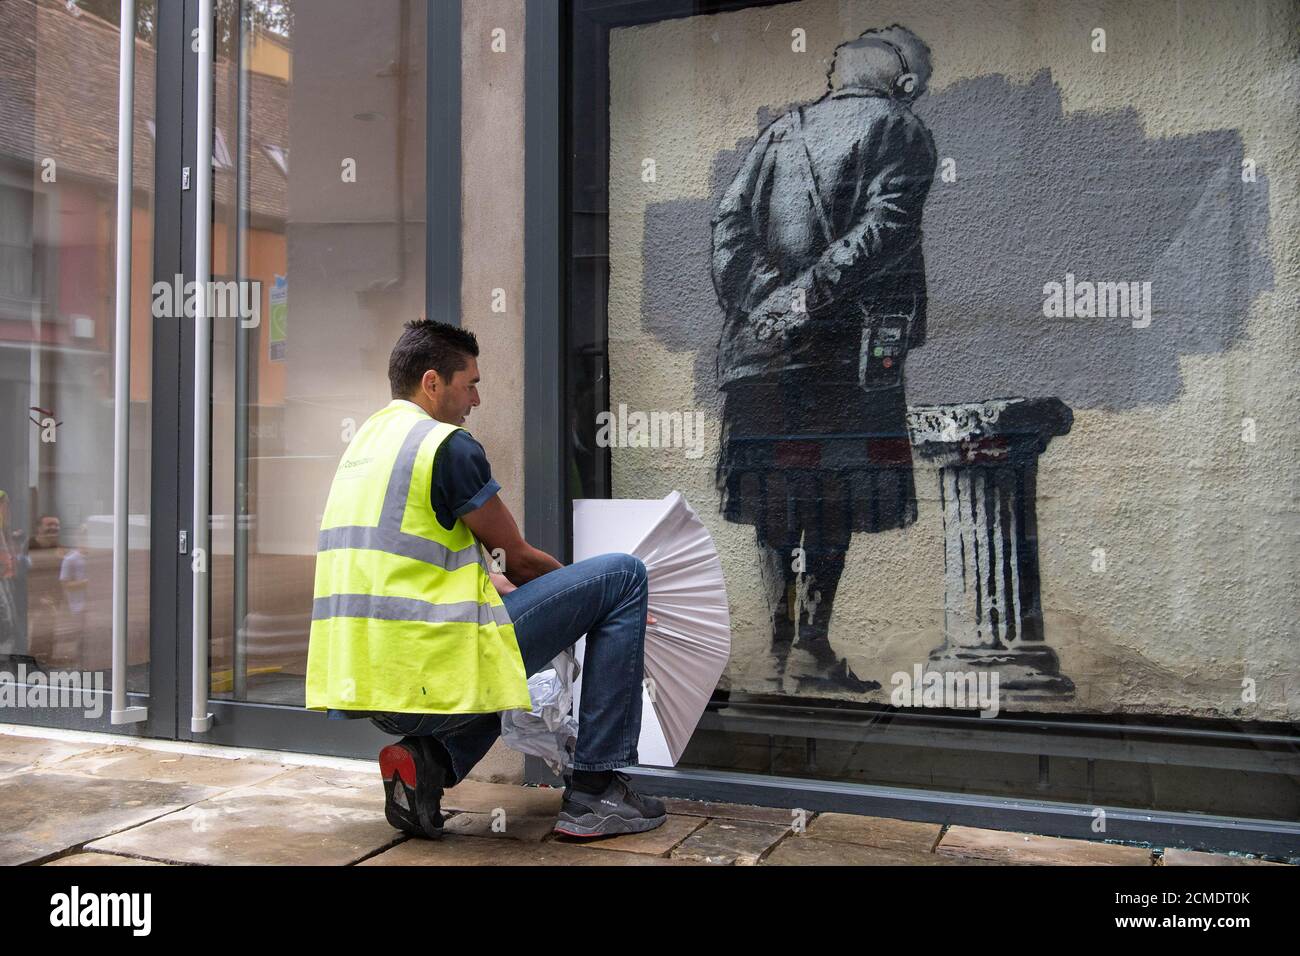 Art Buff, a painting by street artist Banksy, is re-installed on Folkestone's Old High Street, as Creative Folkestone announces a new art project called The Plinth – placing 10 vacant plinths in various locations around the seaside town and inviting residents and visitors to use them to display their artistic talents. Stock Photo